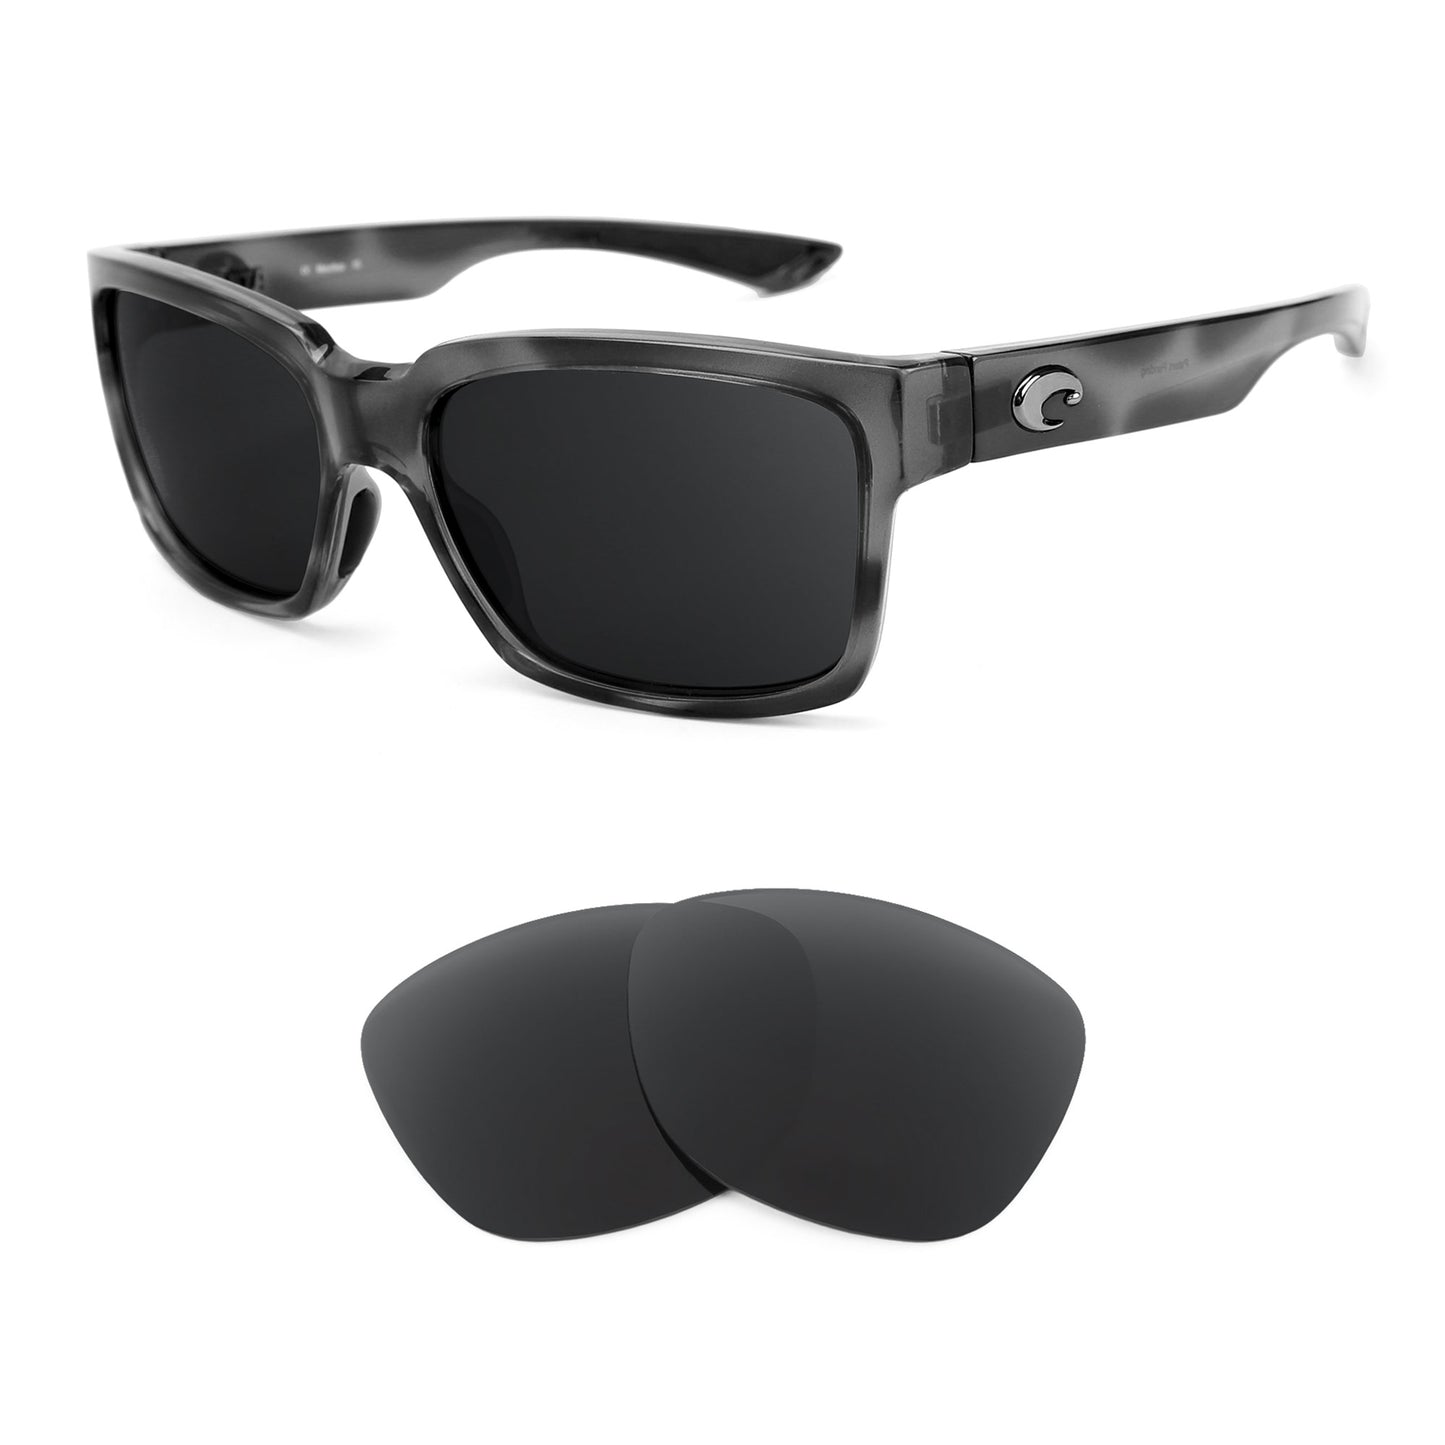 Costa Playa sunglasses with replacement lenses